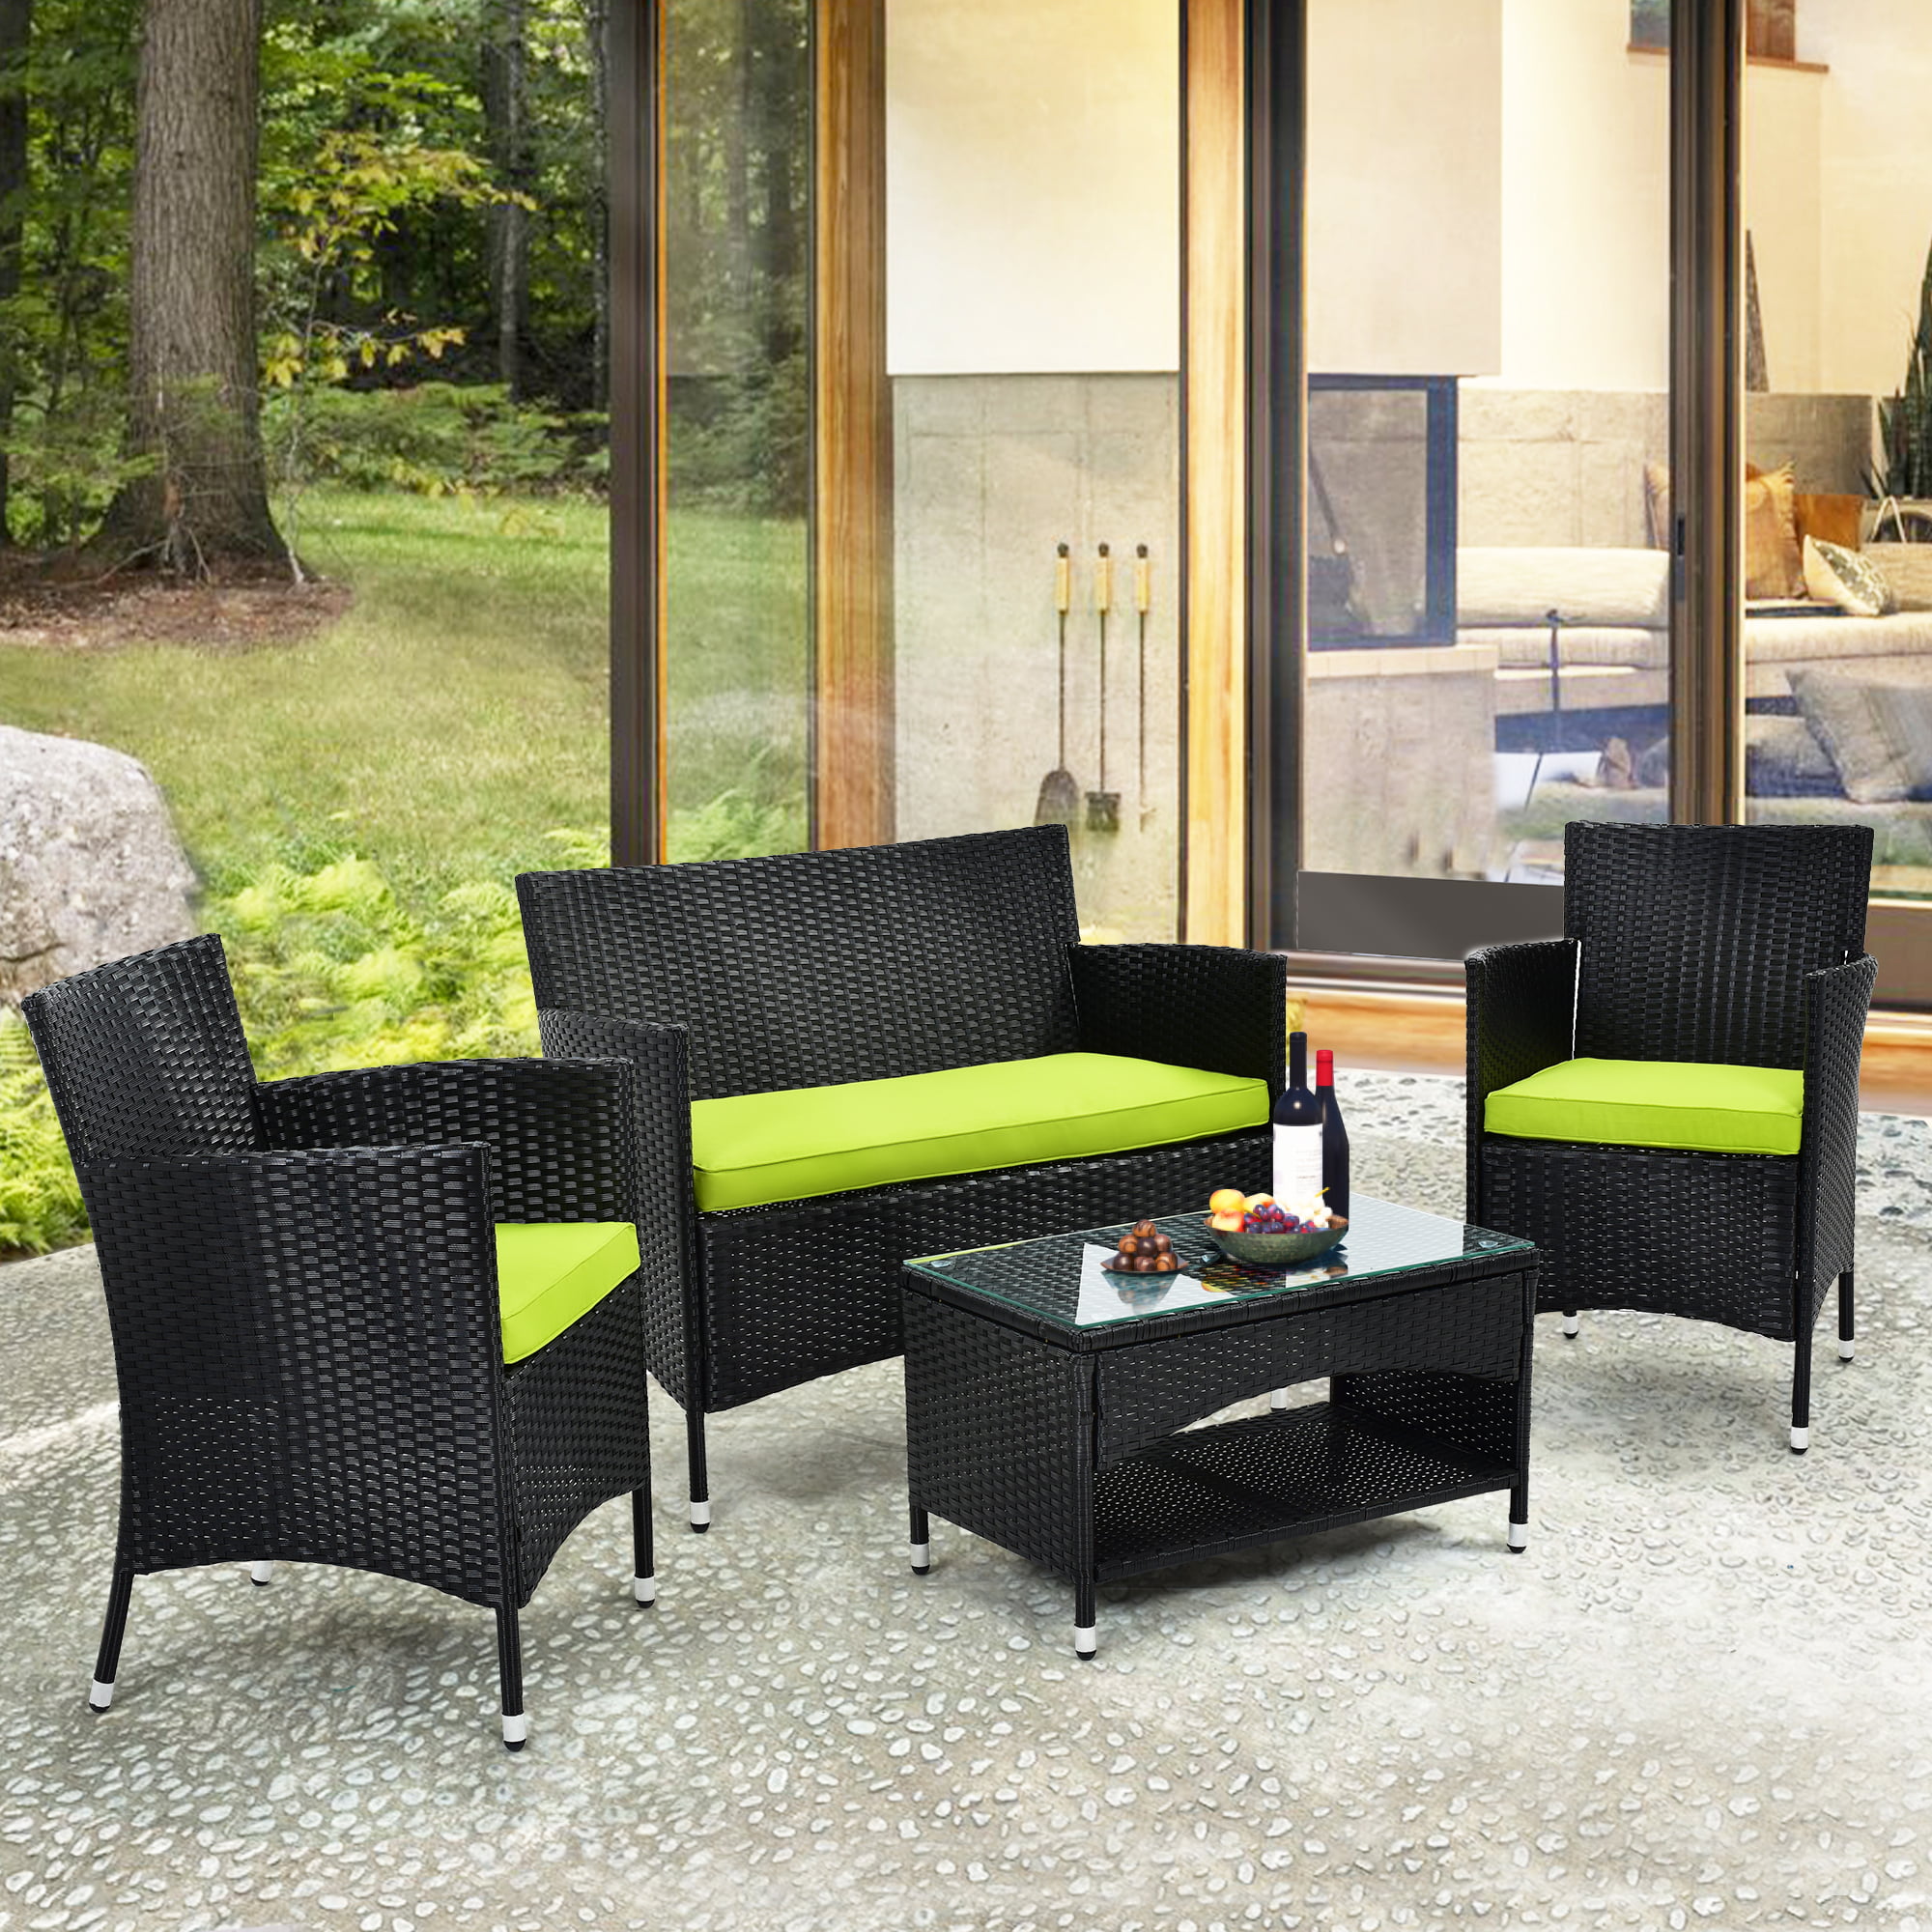 Details about   4PC Furniture Patio Outdoor Rattan Wicker Conversation Sofa Table Cushion Garden 